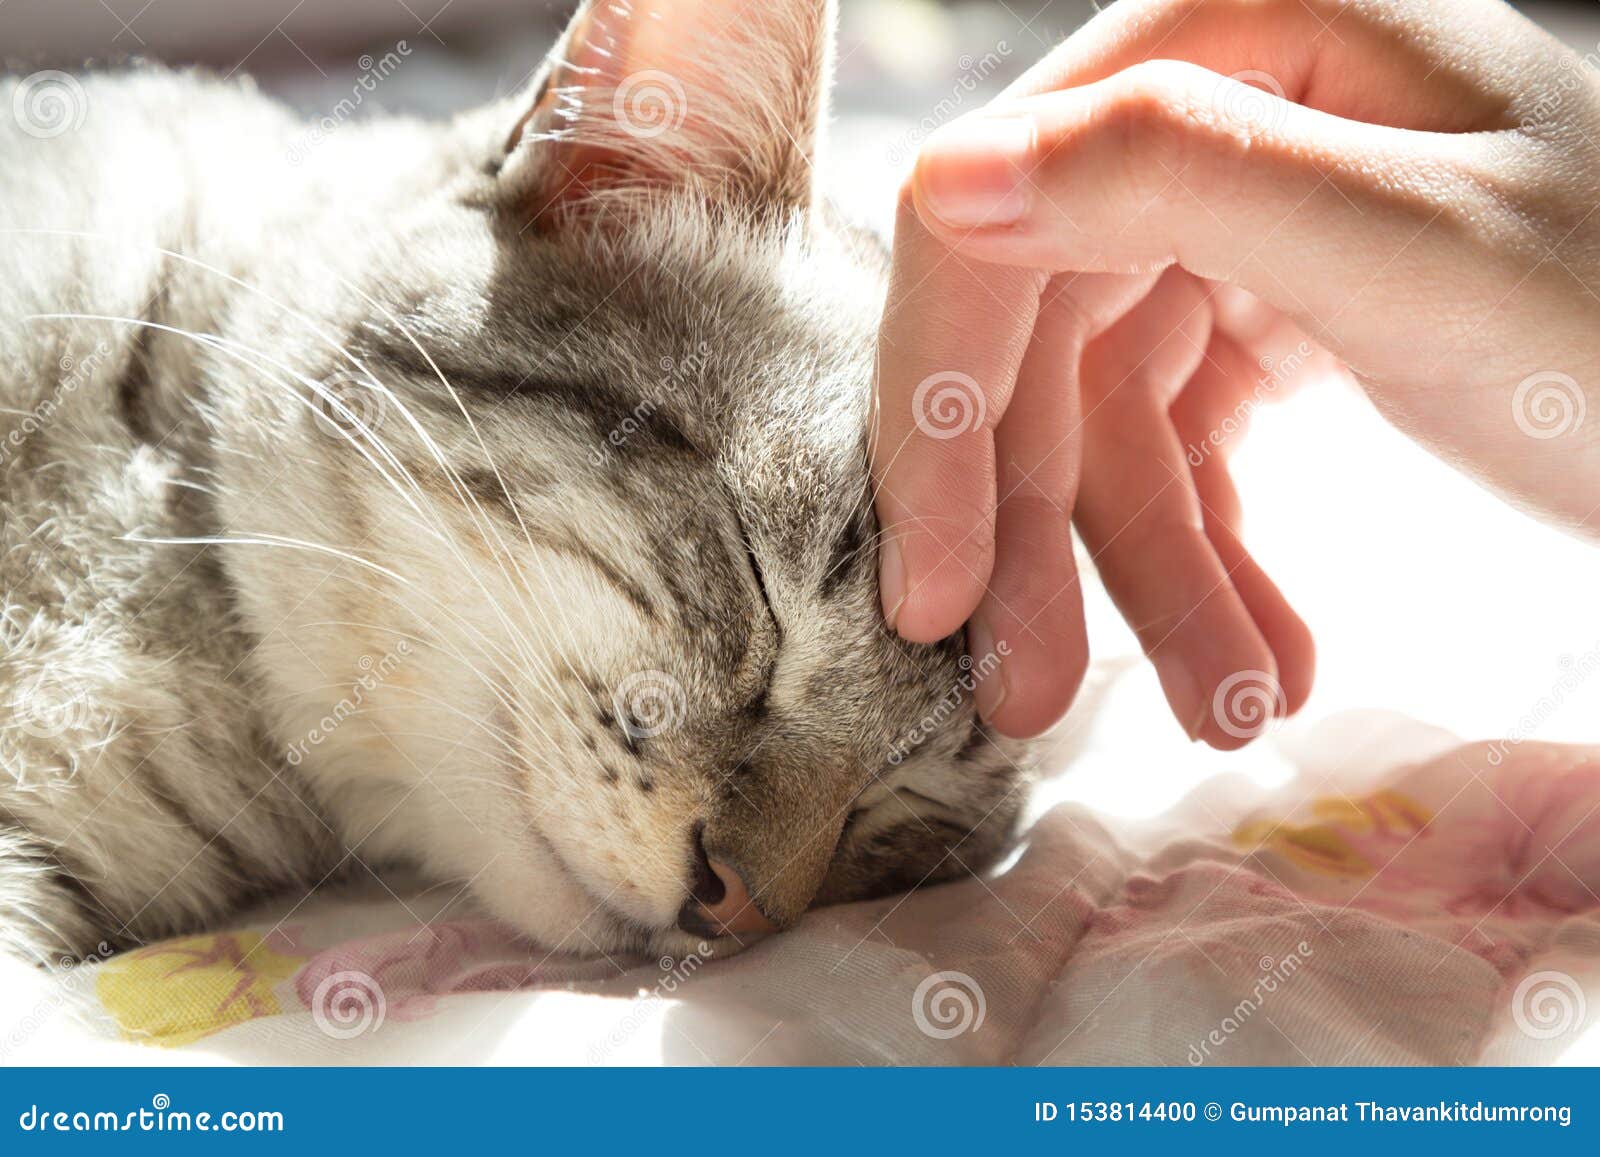 woman hand petting a cat head with sunlight at sunday morning. love to animals